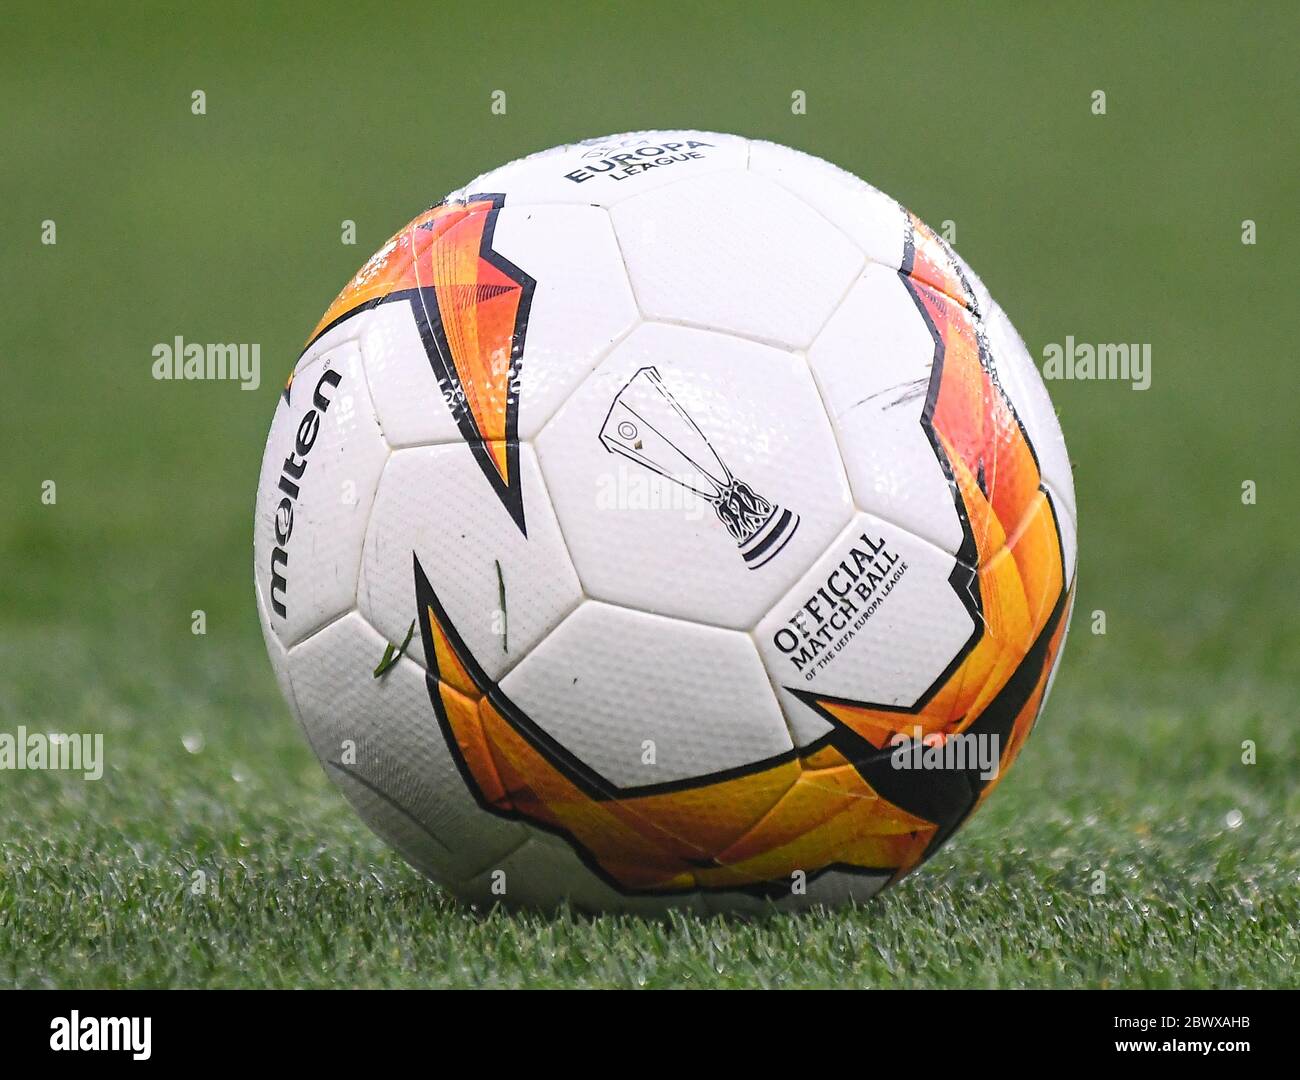 LONDON, ENGLAND - APRIL 18, 2019: The official match ball pictured ahead of the second leg of the 2018/19 UEFA Europa League Quarter-Finals game between Chelsea FC (England) and SK Slavia Praha (Czech Republic) at Stamford Bridge. Stock Photo